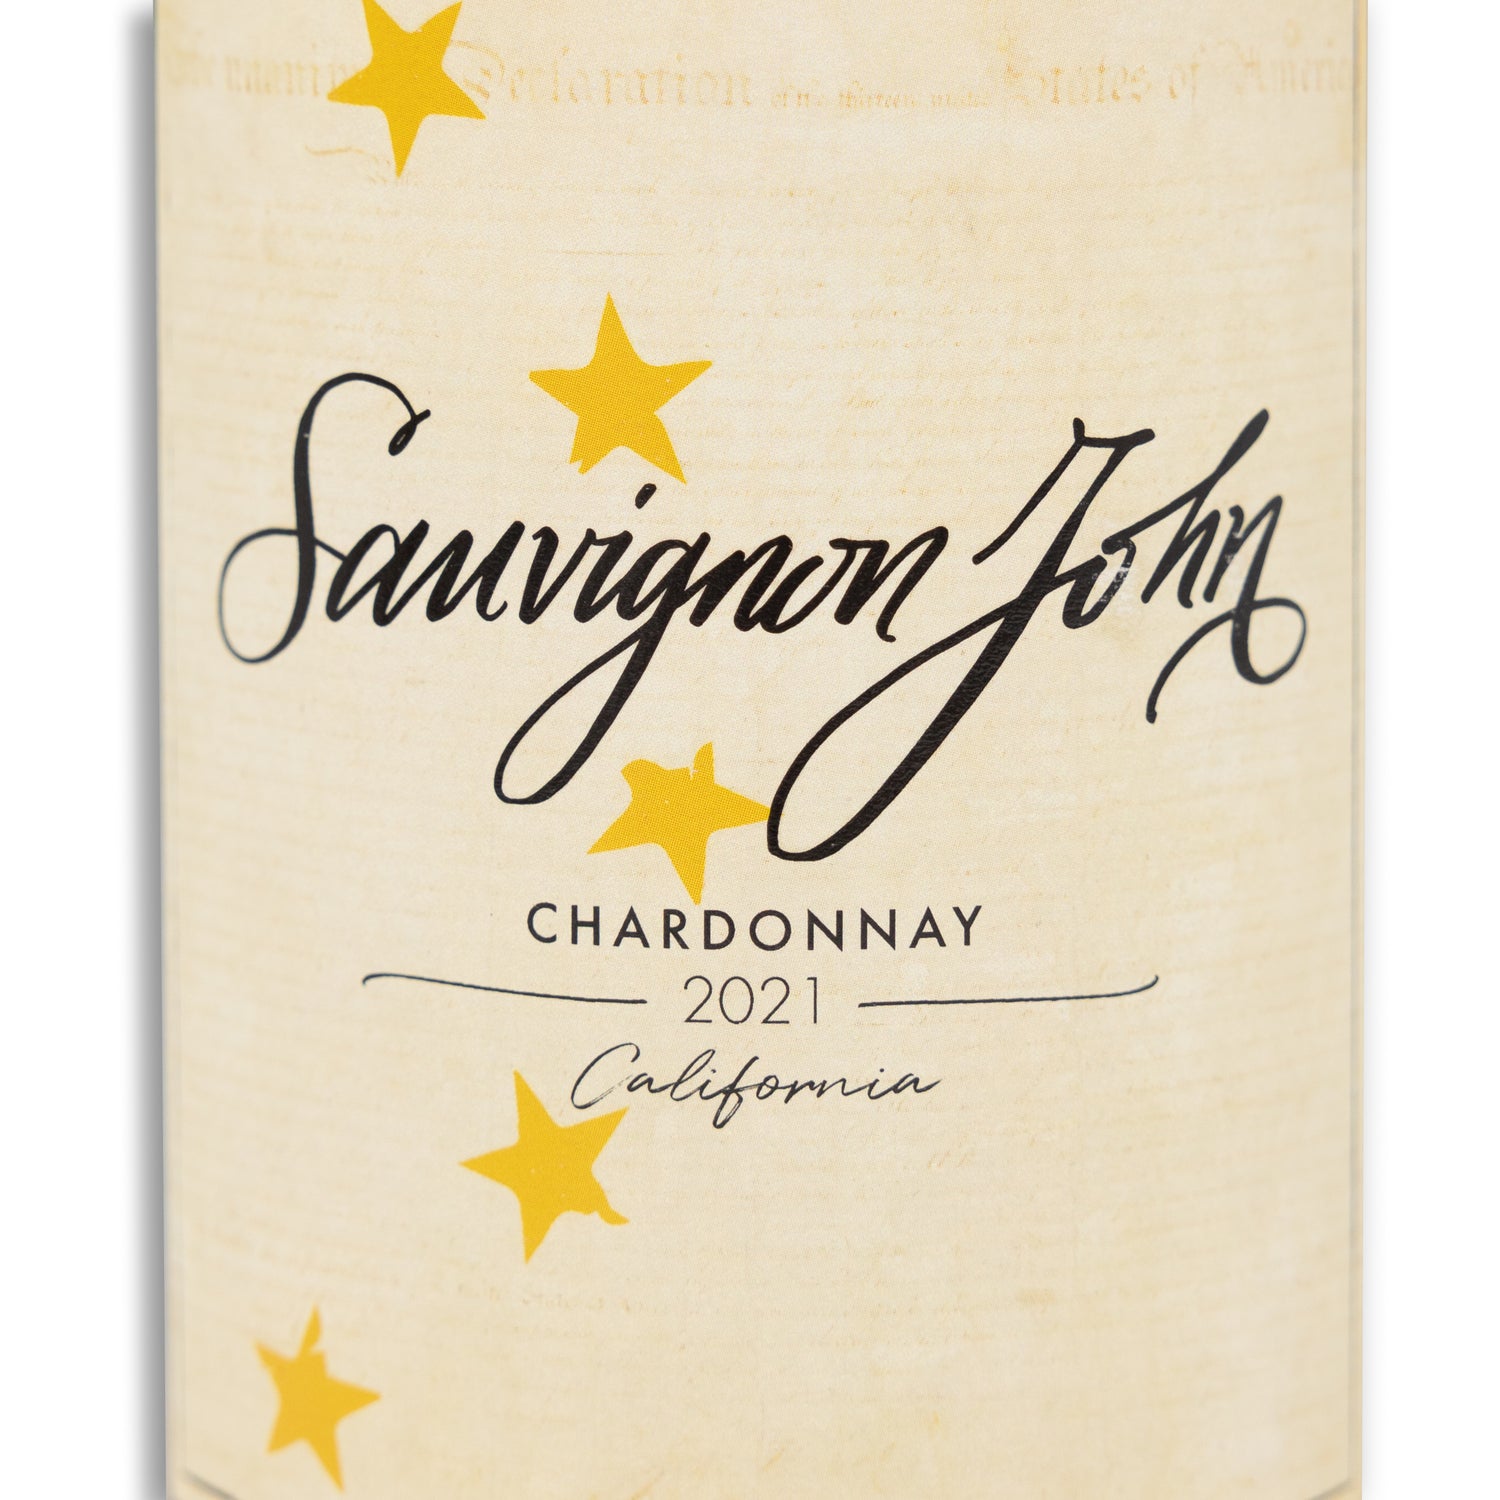 Instore Pick Up Or Local Delivery Only: Sauvignon John Chardonnay Whit